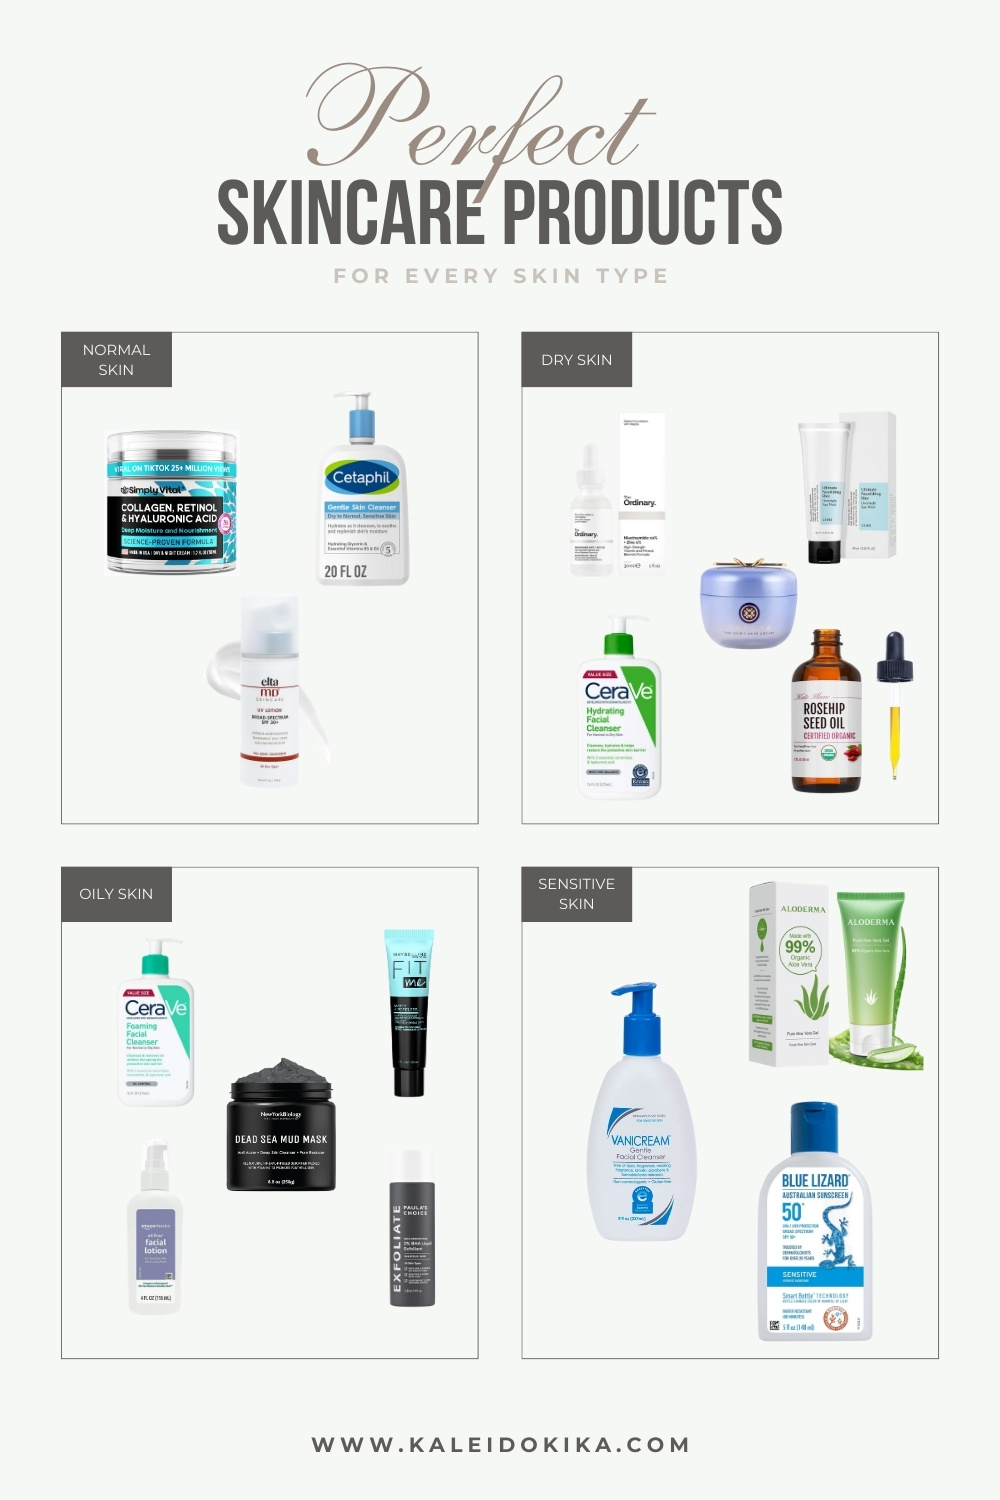 Image showing different products adequate for different skincare routines